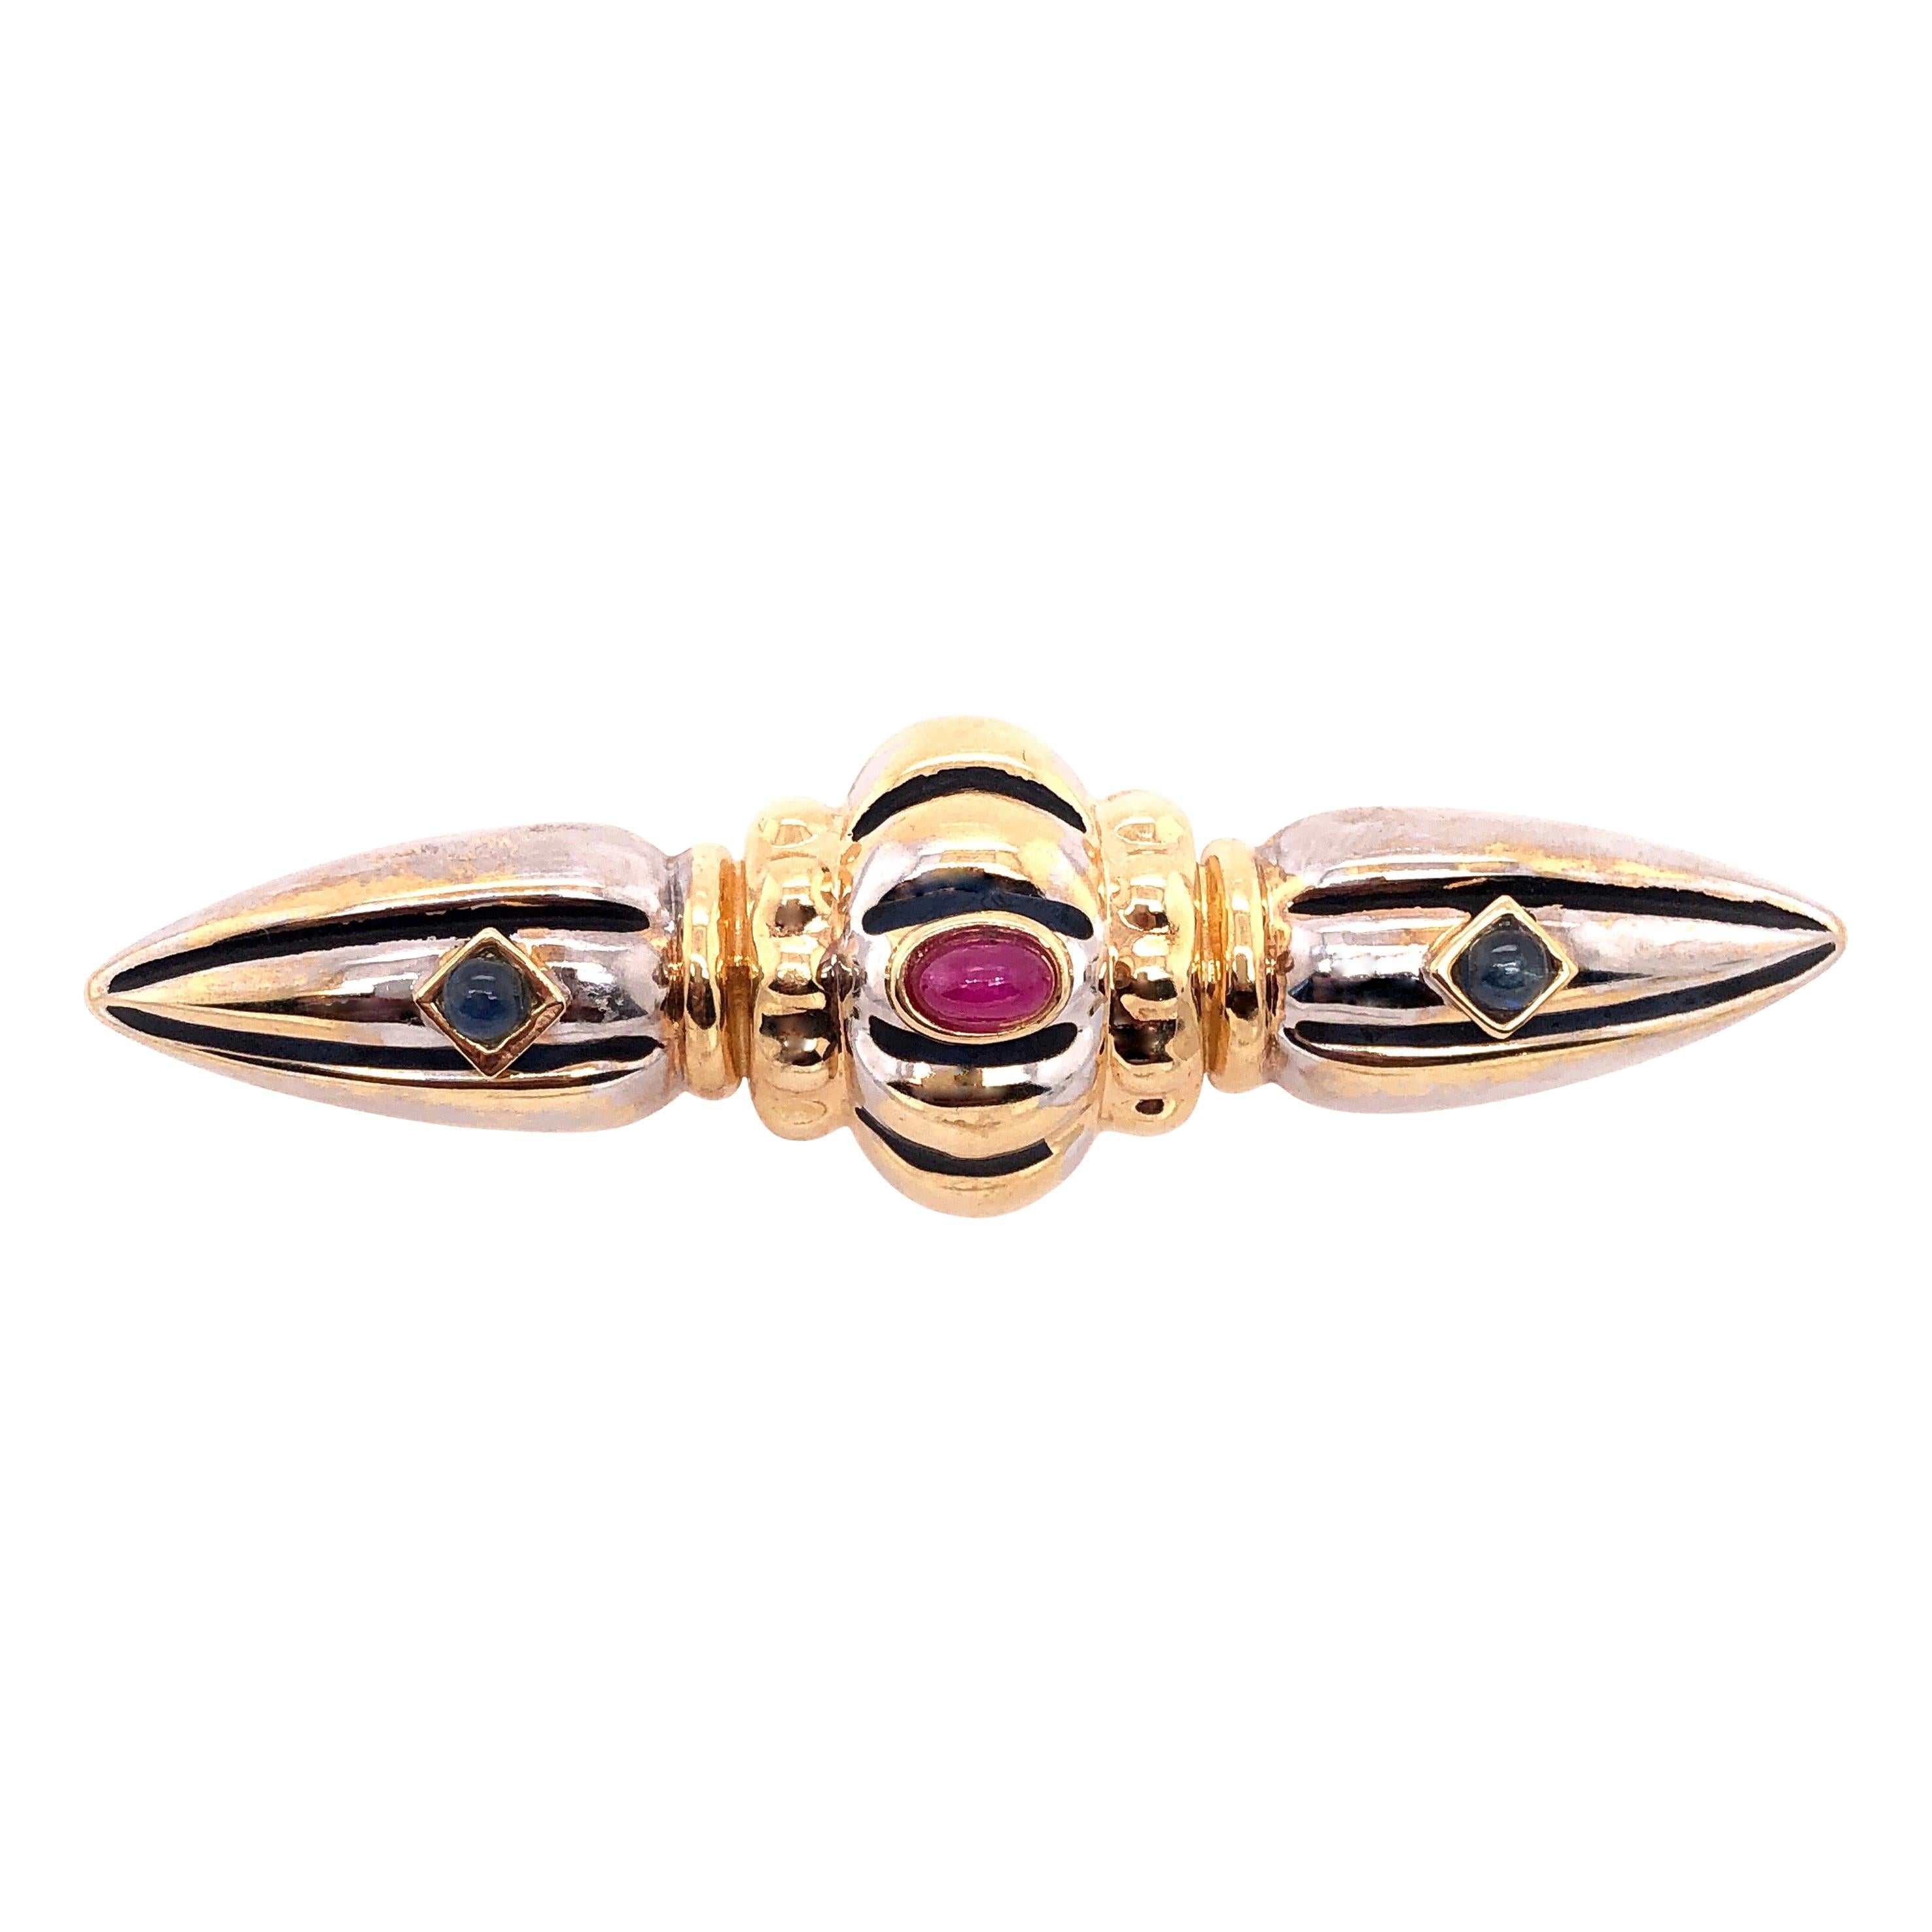 14 Karat Two-Tone Yellow and White Gold Brooch with Ruby and Sapphire Cabochon